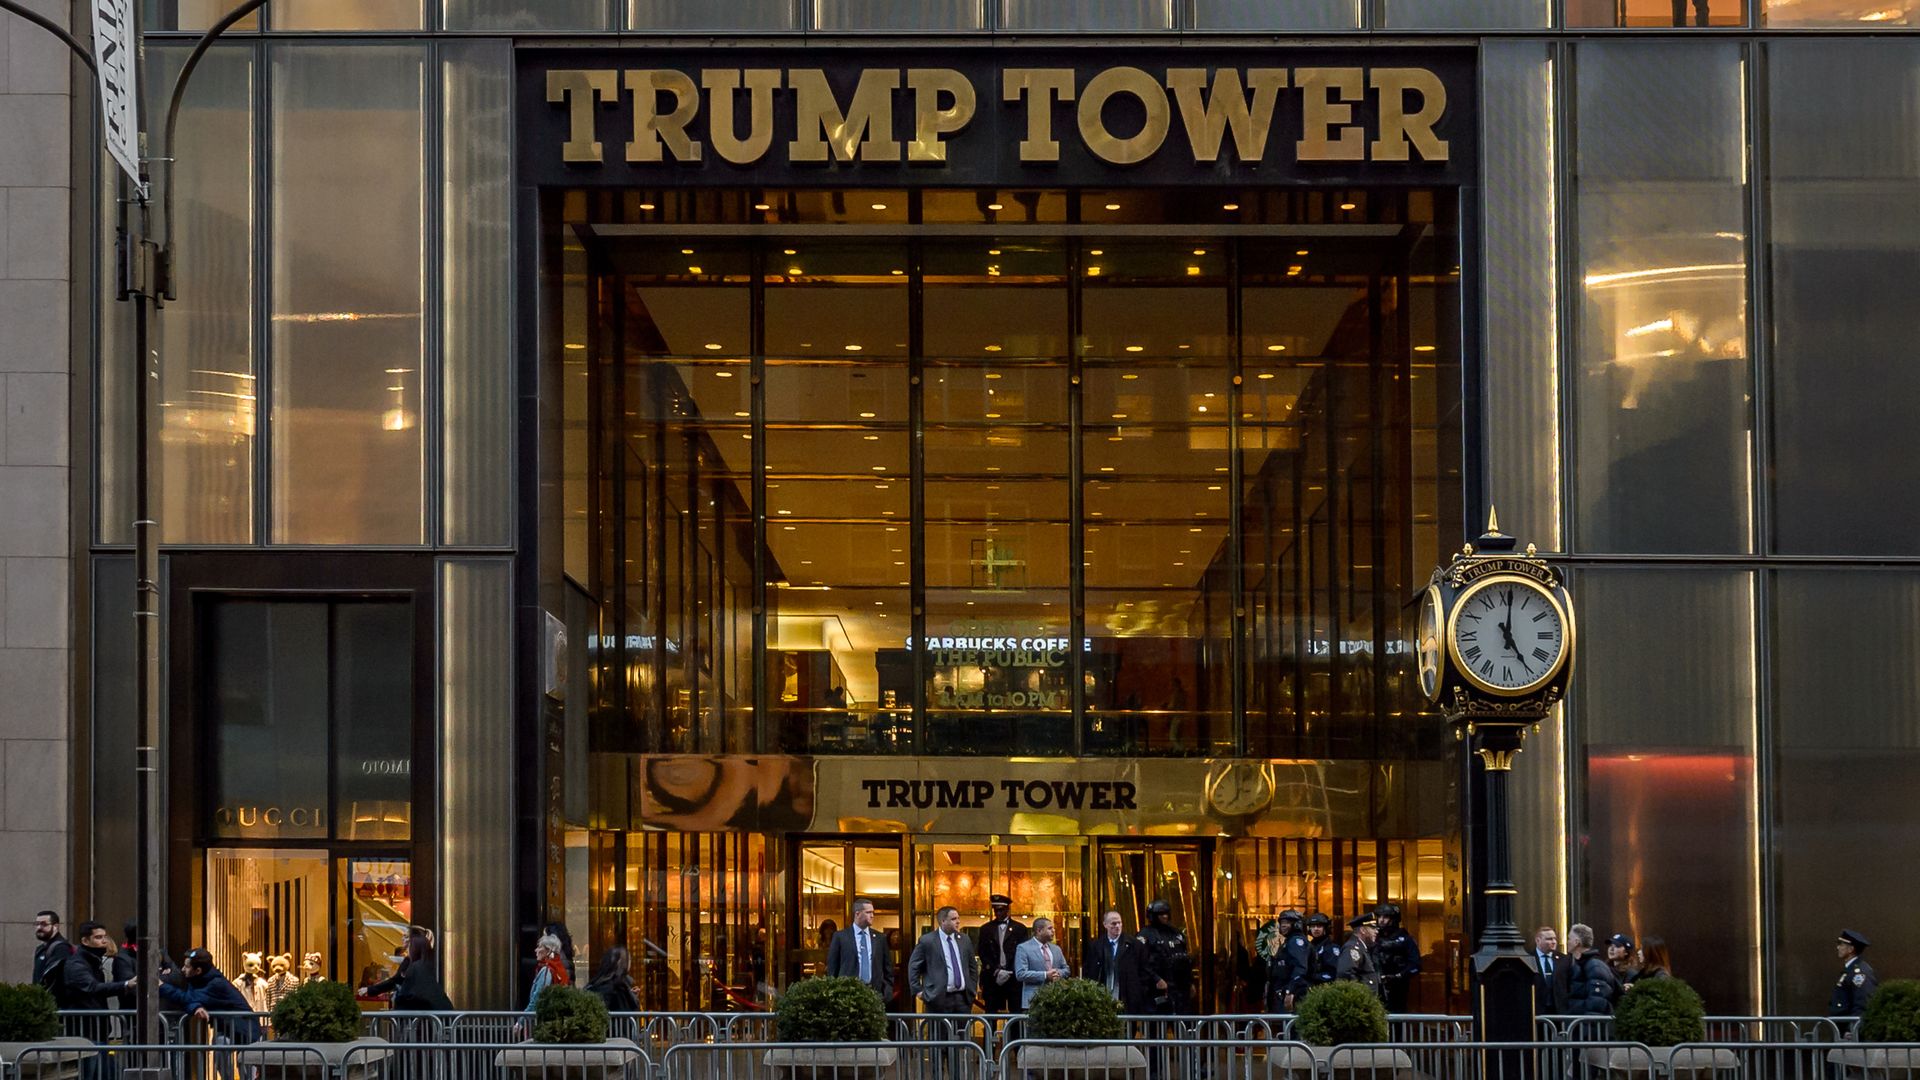 This image shows the front doors of Trump Tower, which are blocked off by concrete barriers.